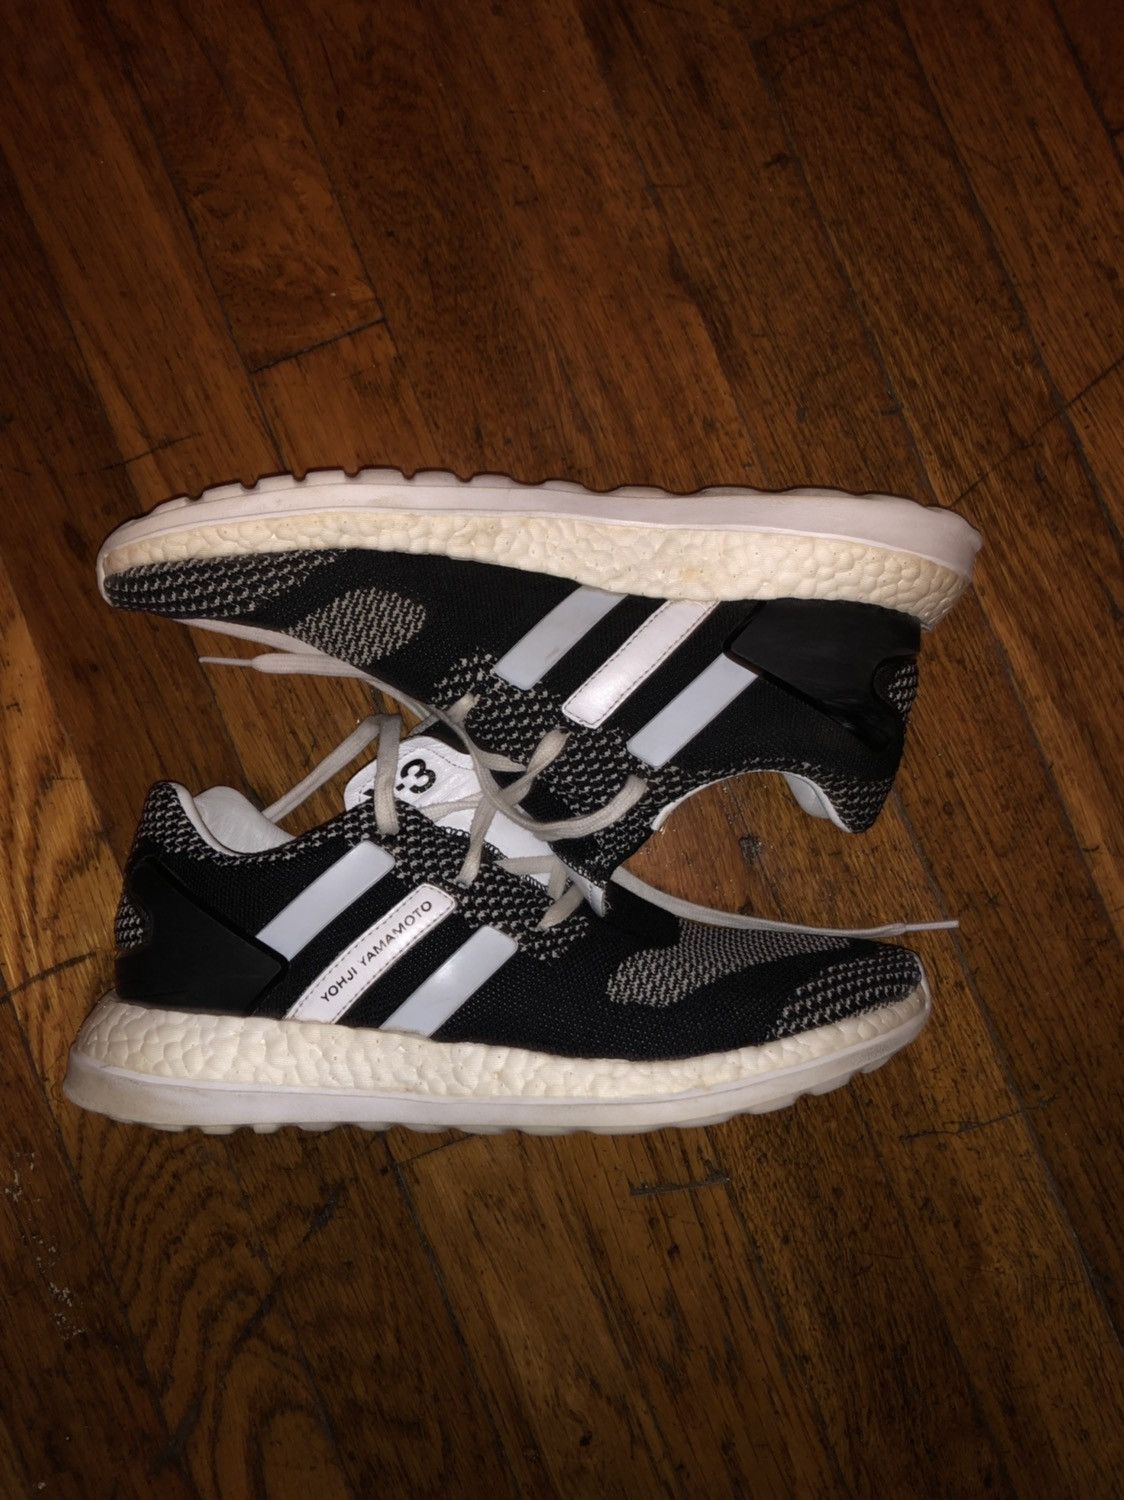 Y 3 Pure Boost Zg Knit | Grailed